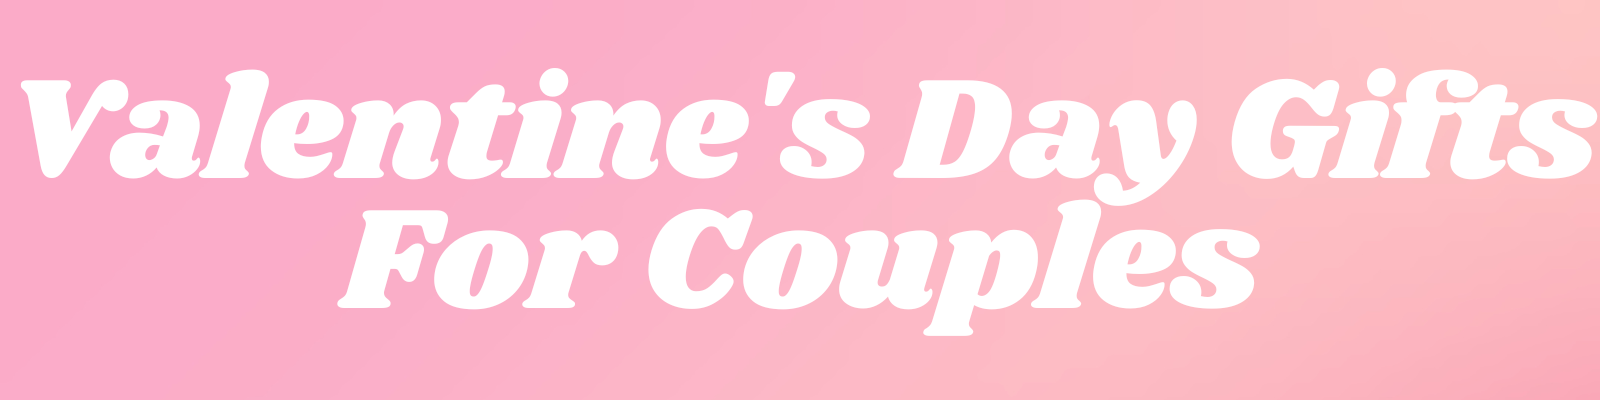 Valentine's Day gifts for couples.